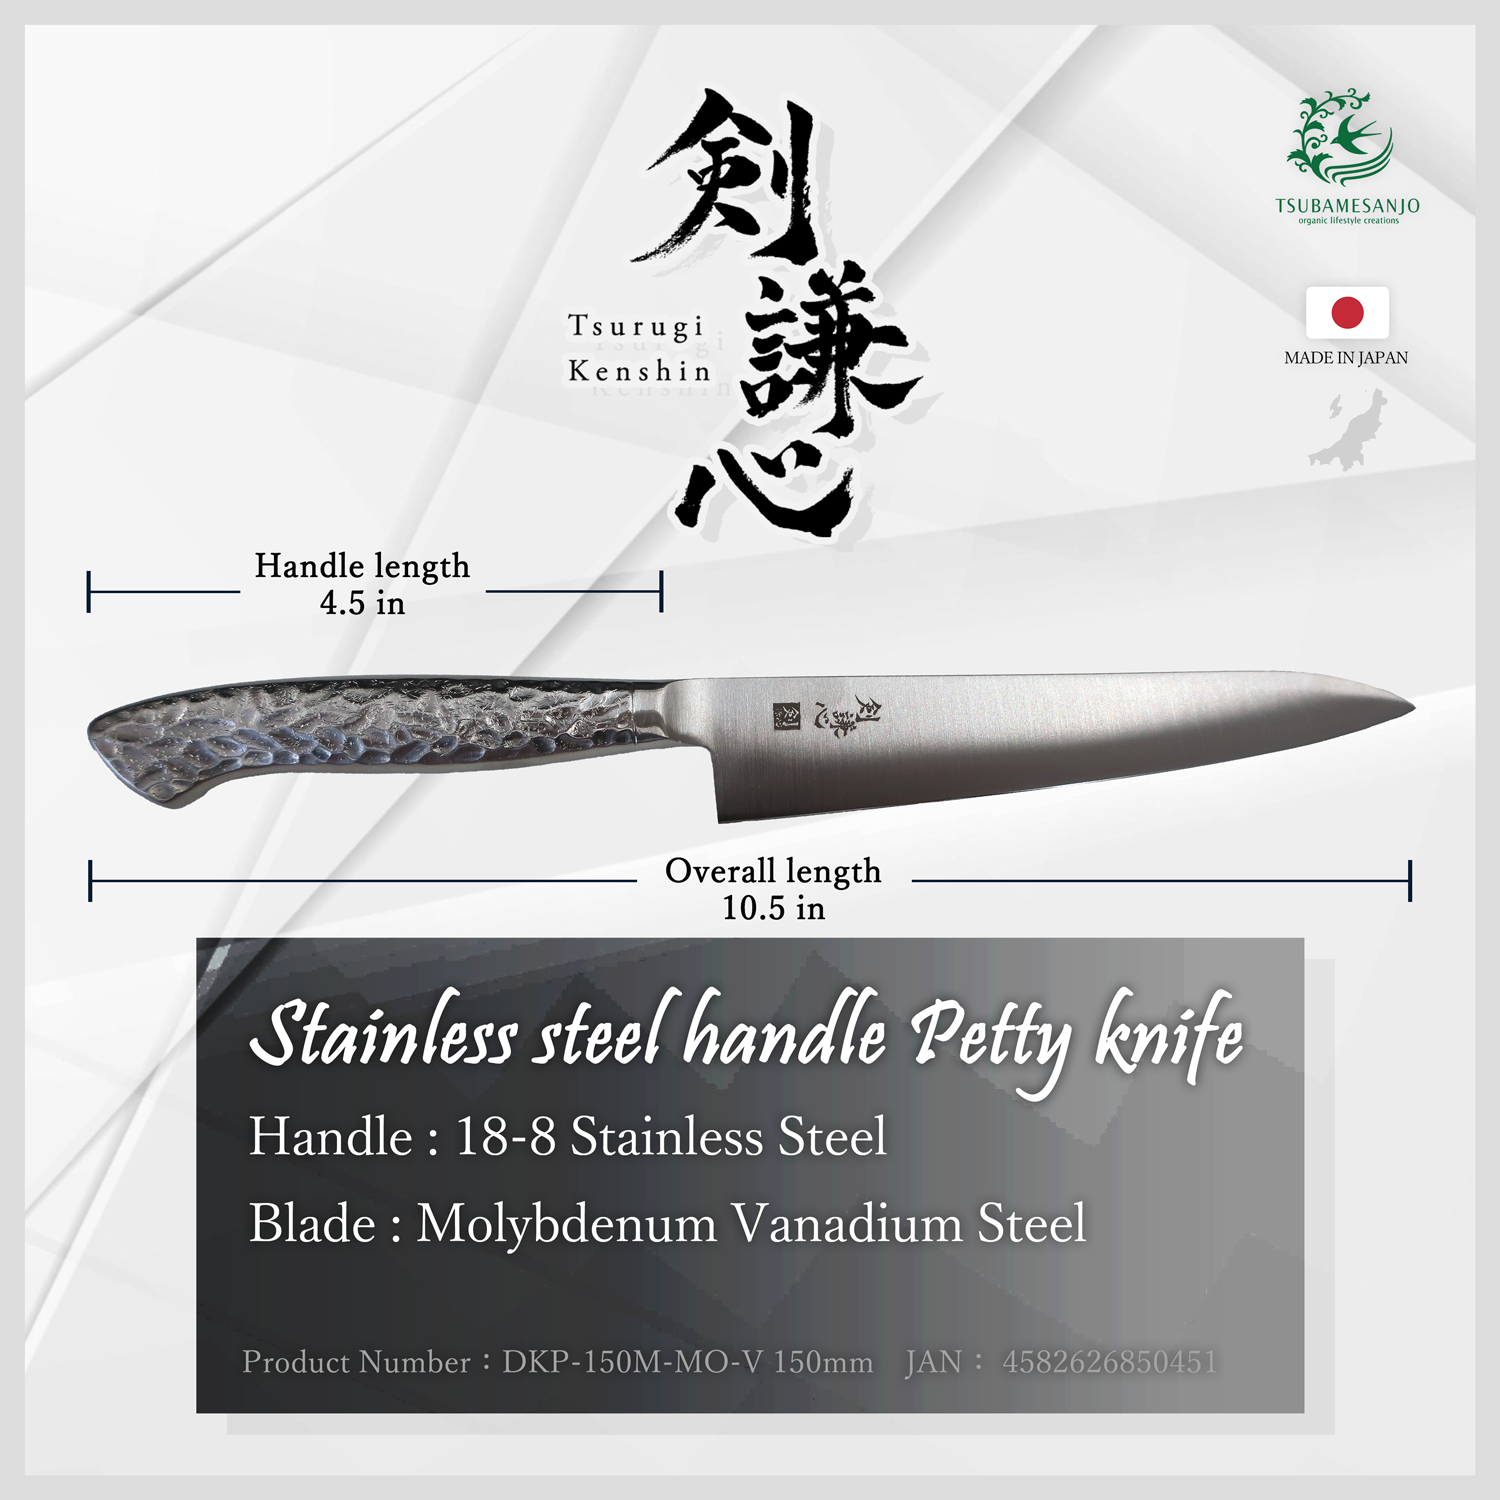 Stainless steel handle Petty knife 150mm (DK-150M-MO-V)